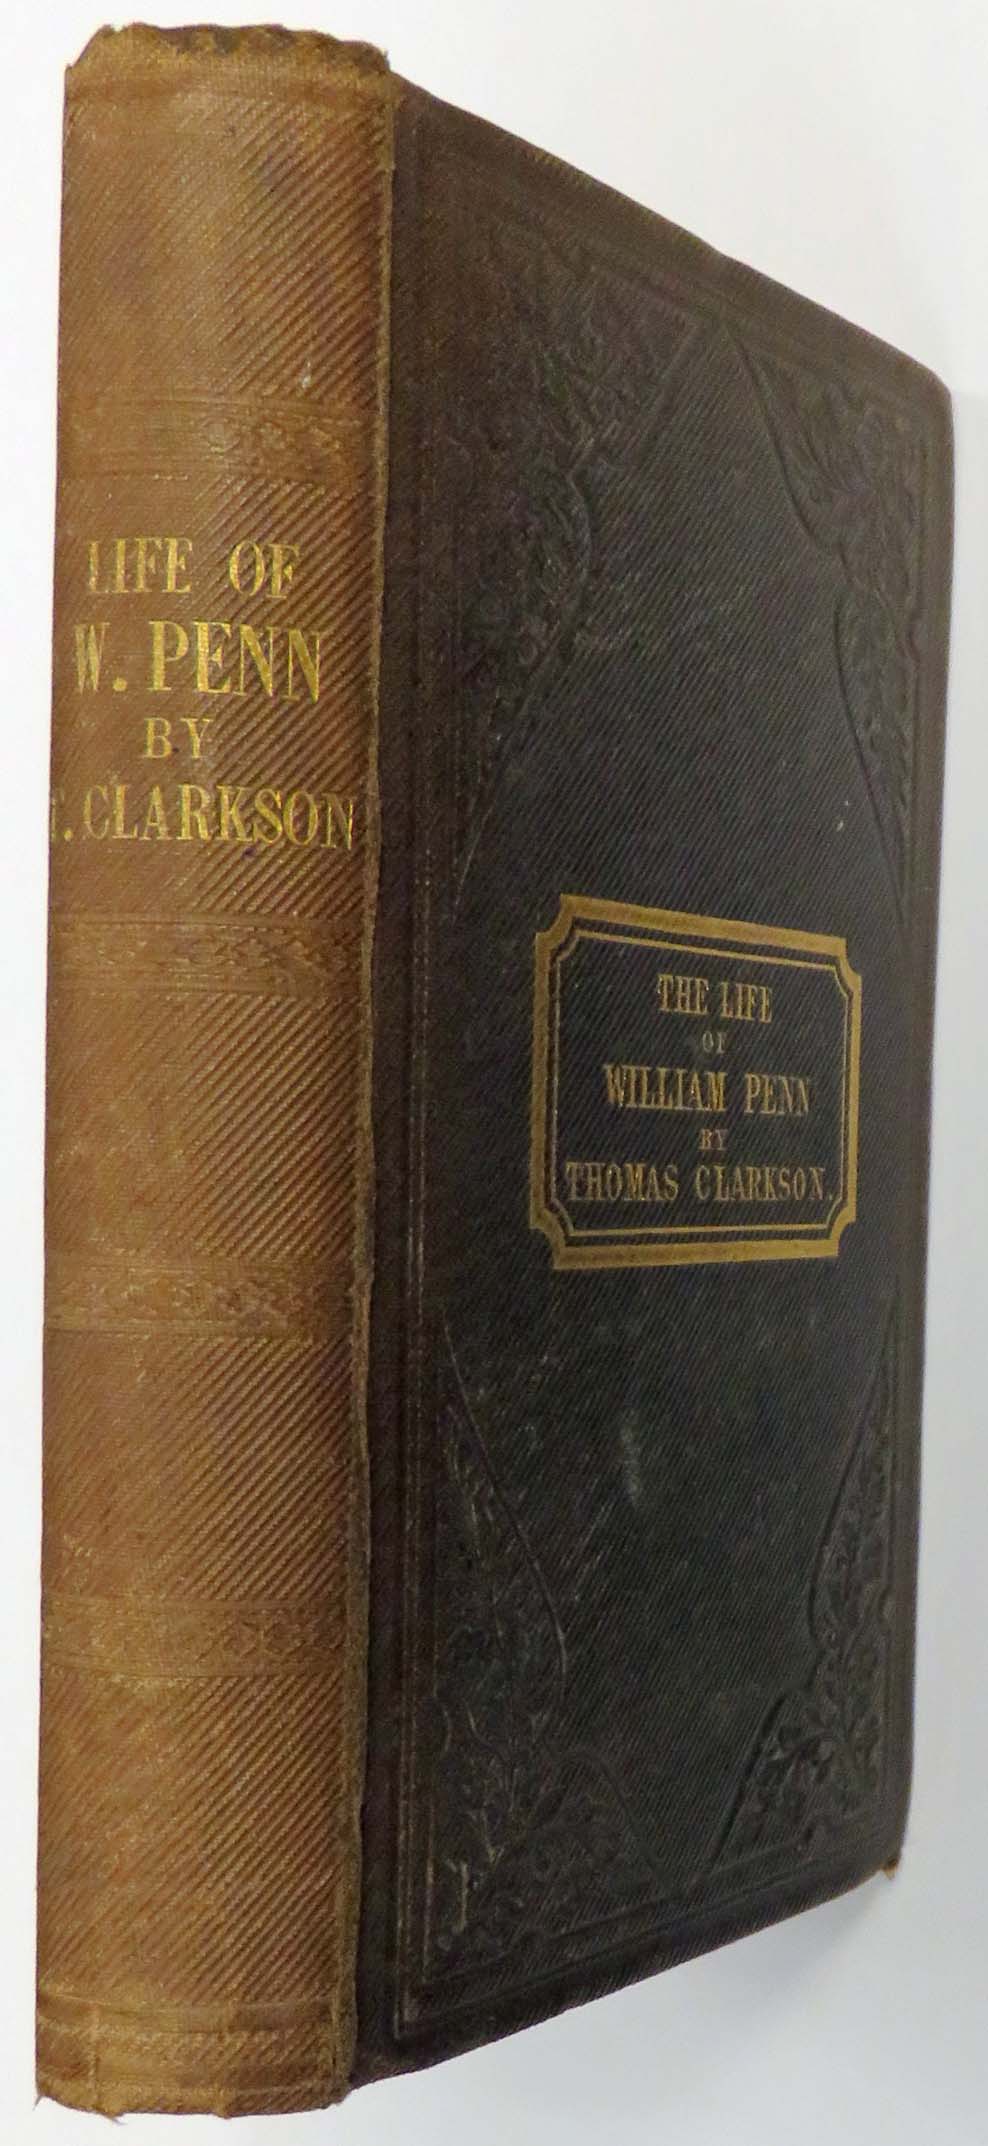 Memoirs of the Public and Private Life of William Penn